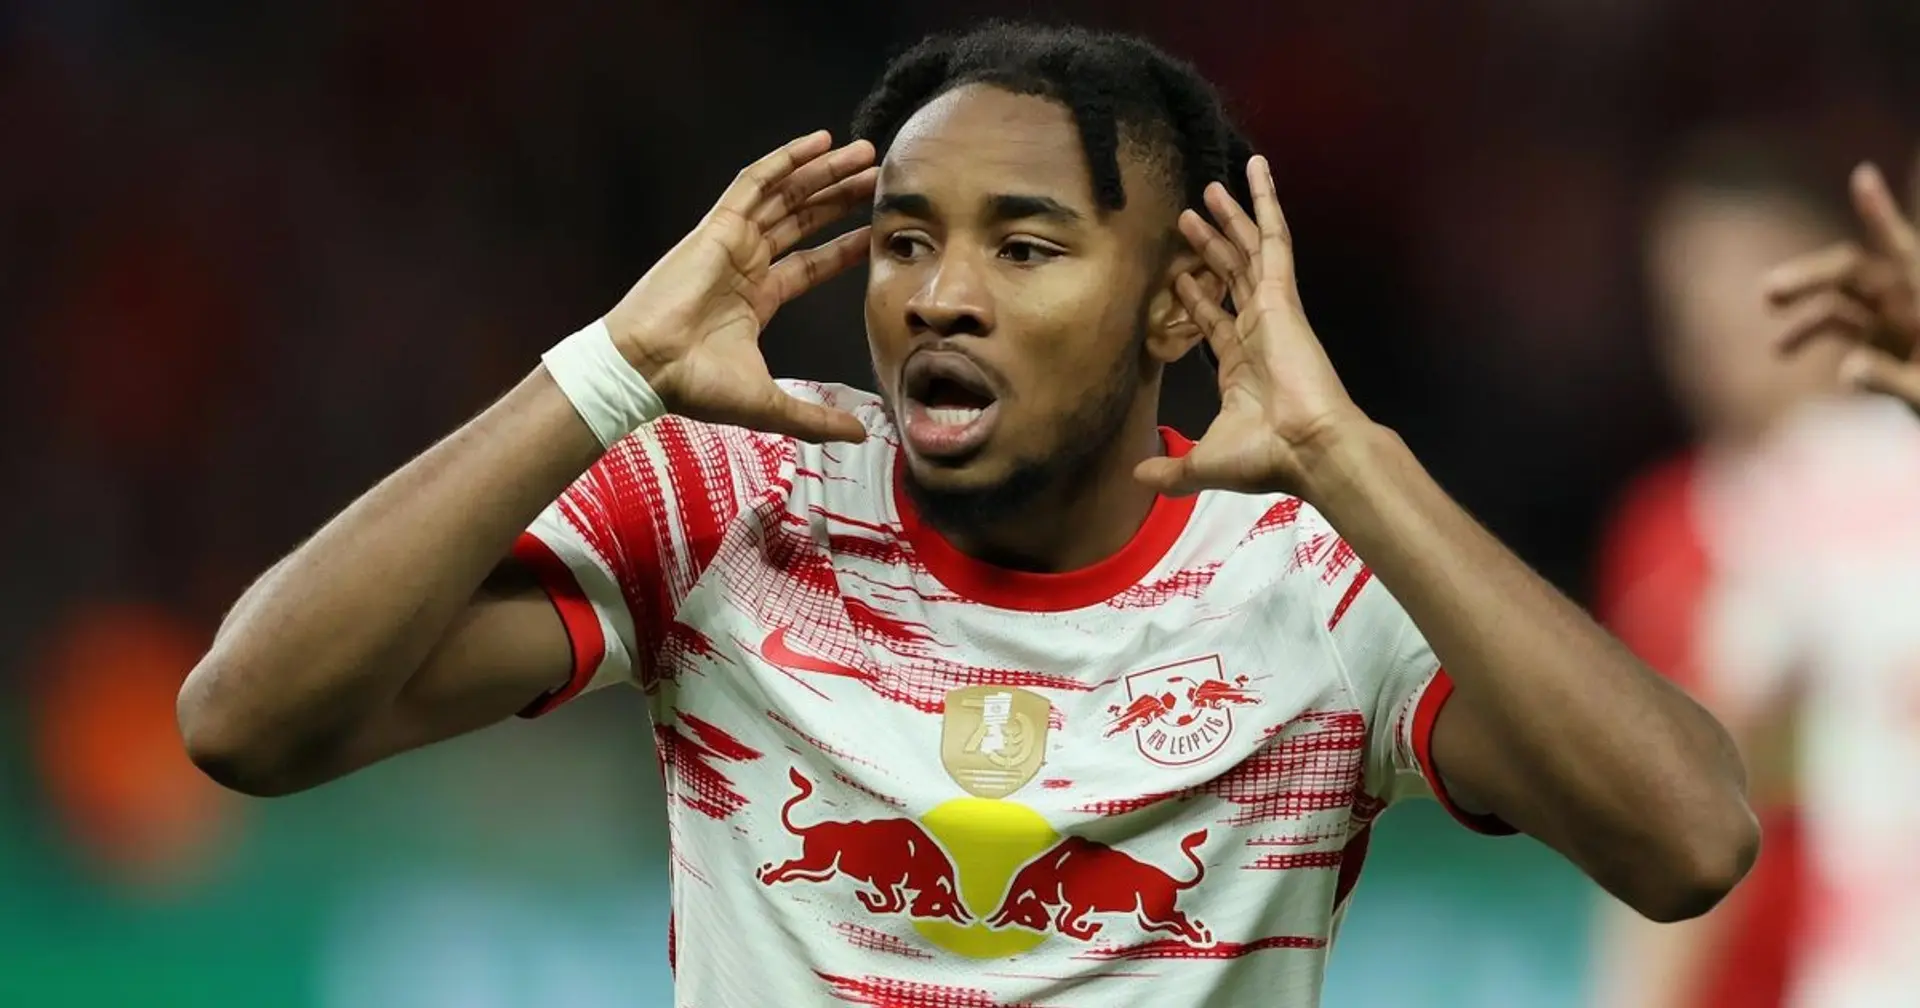 Man United target Nkunku signs new long-term deal to stay at RB Leipzig - release clause revealed